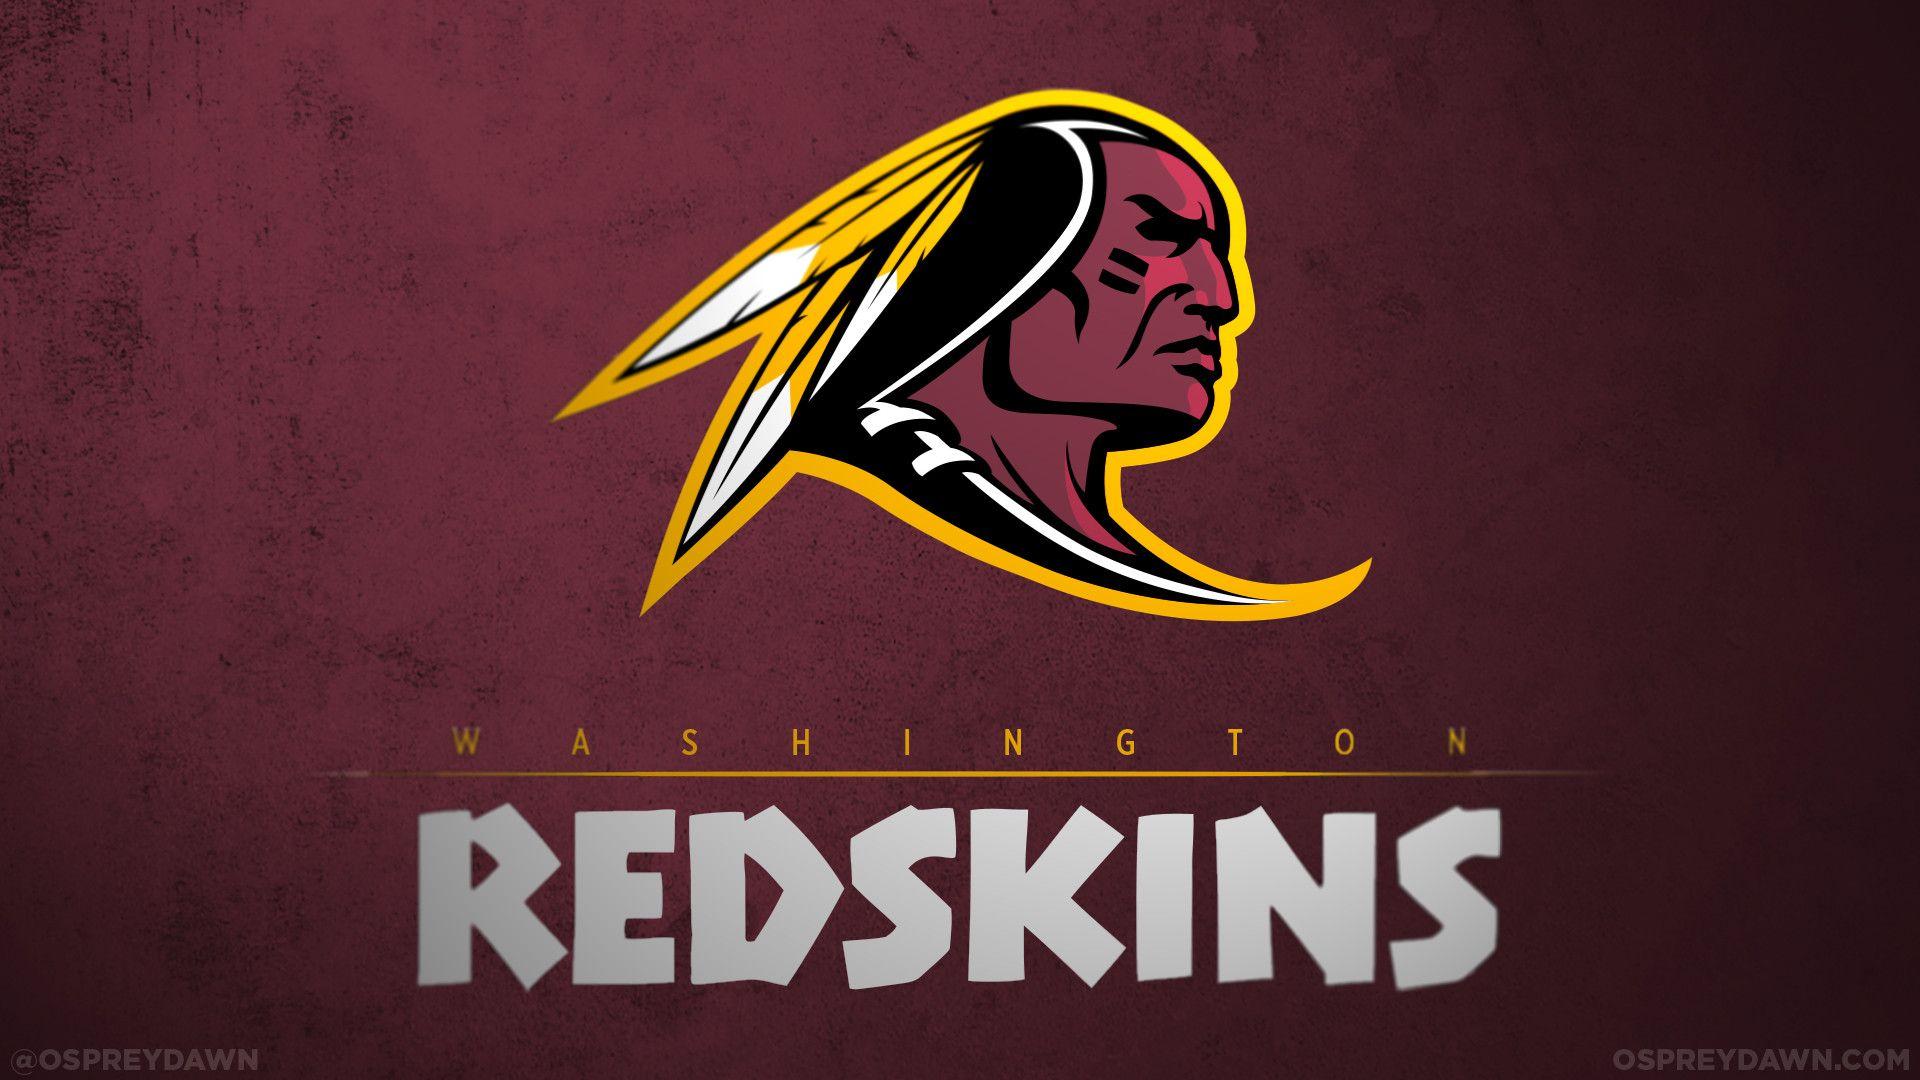 Fancy Nfl Logo Redesigns 54 About Remodel Best Logos With Nfl Logo